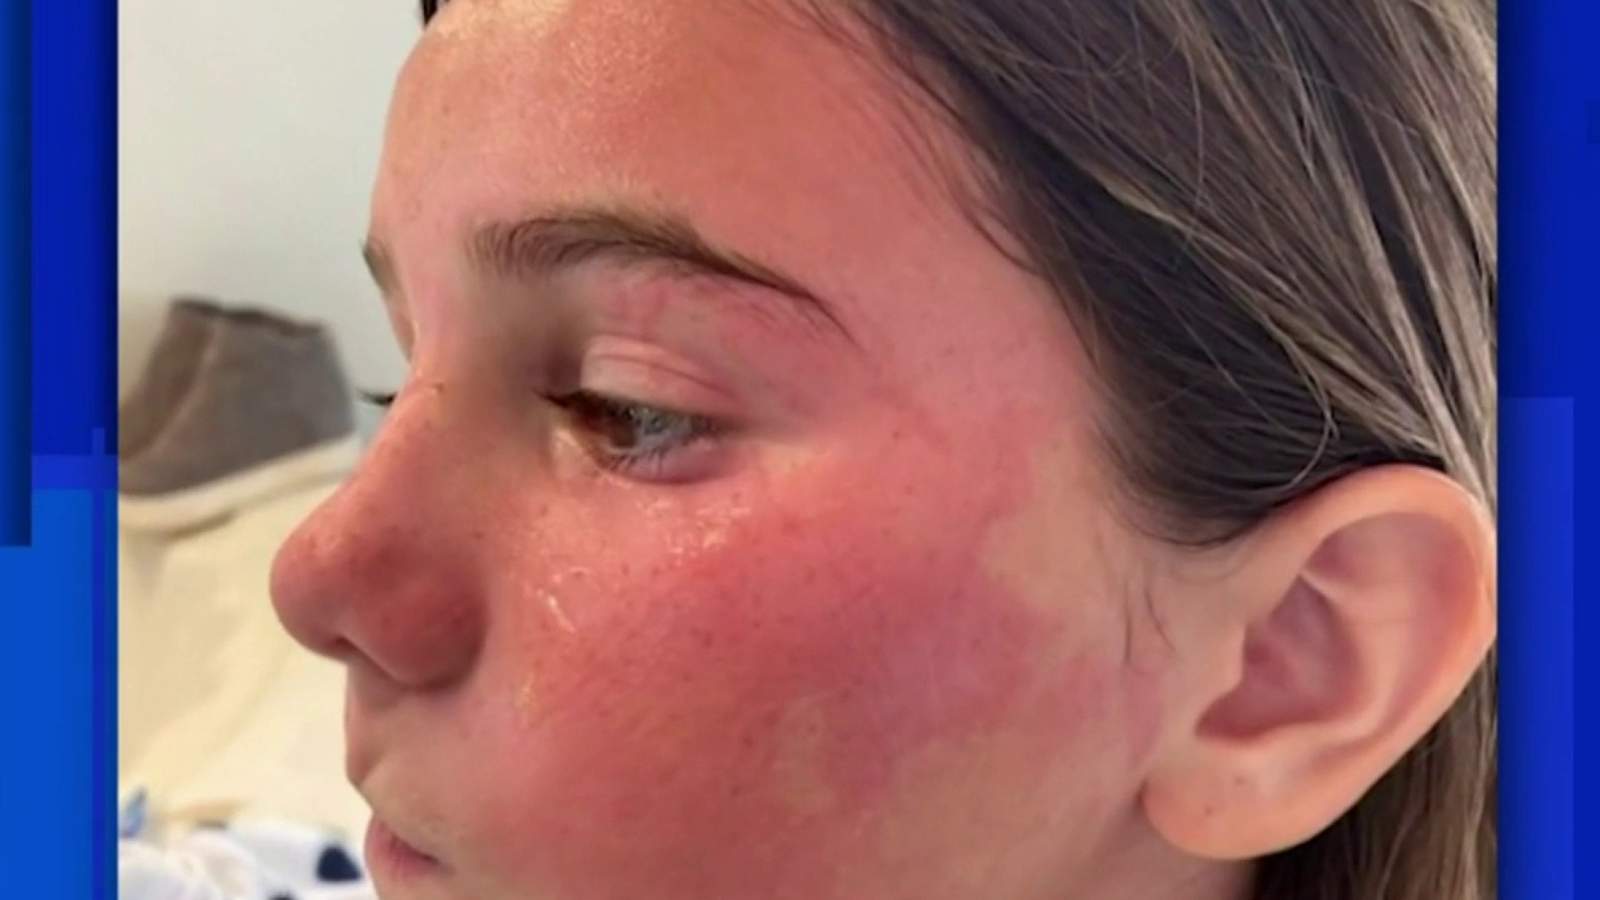 Mother speaks out after child suffers serious reaction from face mask